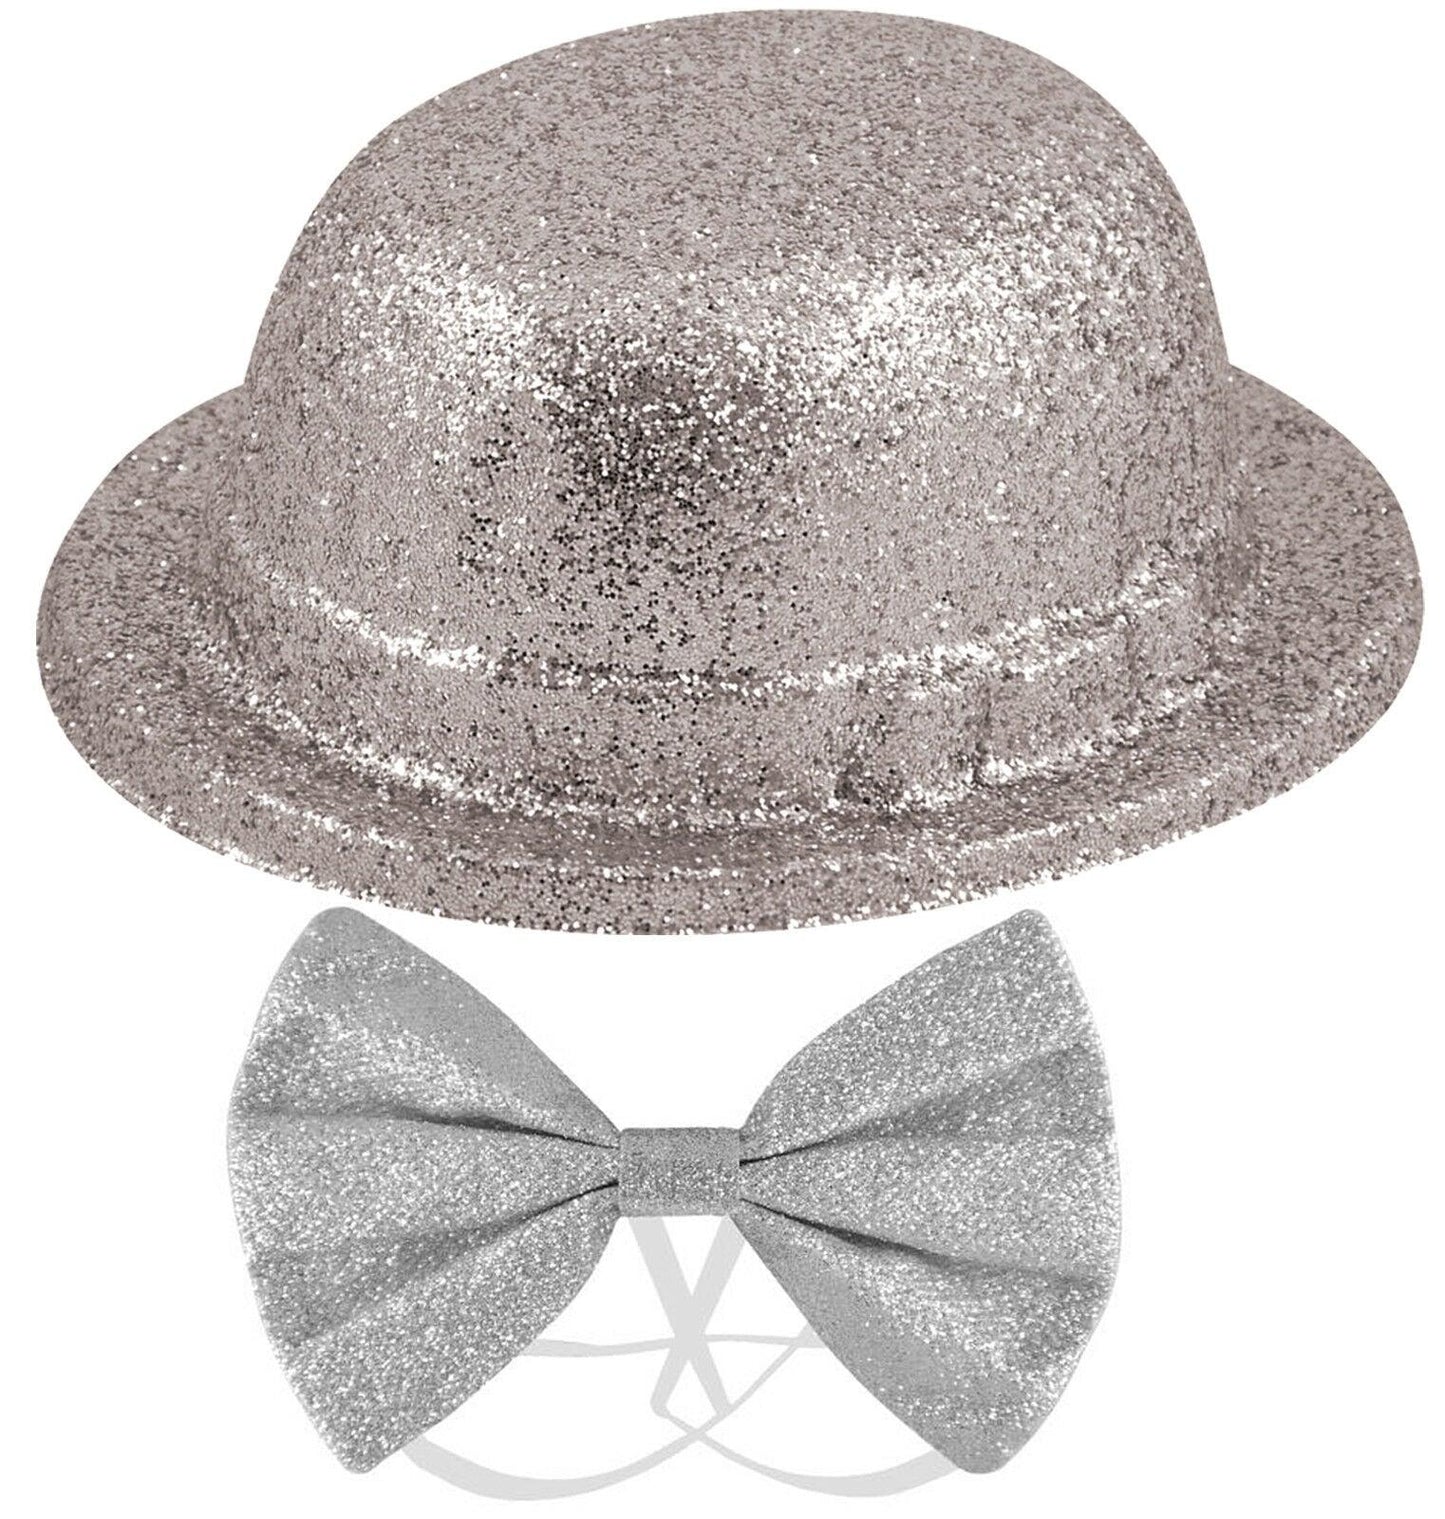 Silver Sparkly Plastic Glitter Bowler Hat with Dicky Dickie Bow Tie Fancy Dress - Labreeze